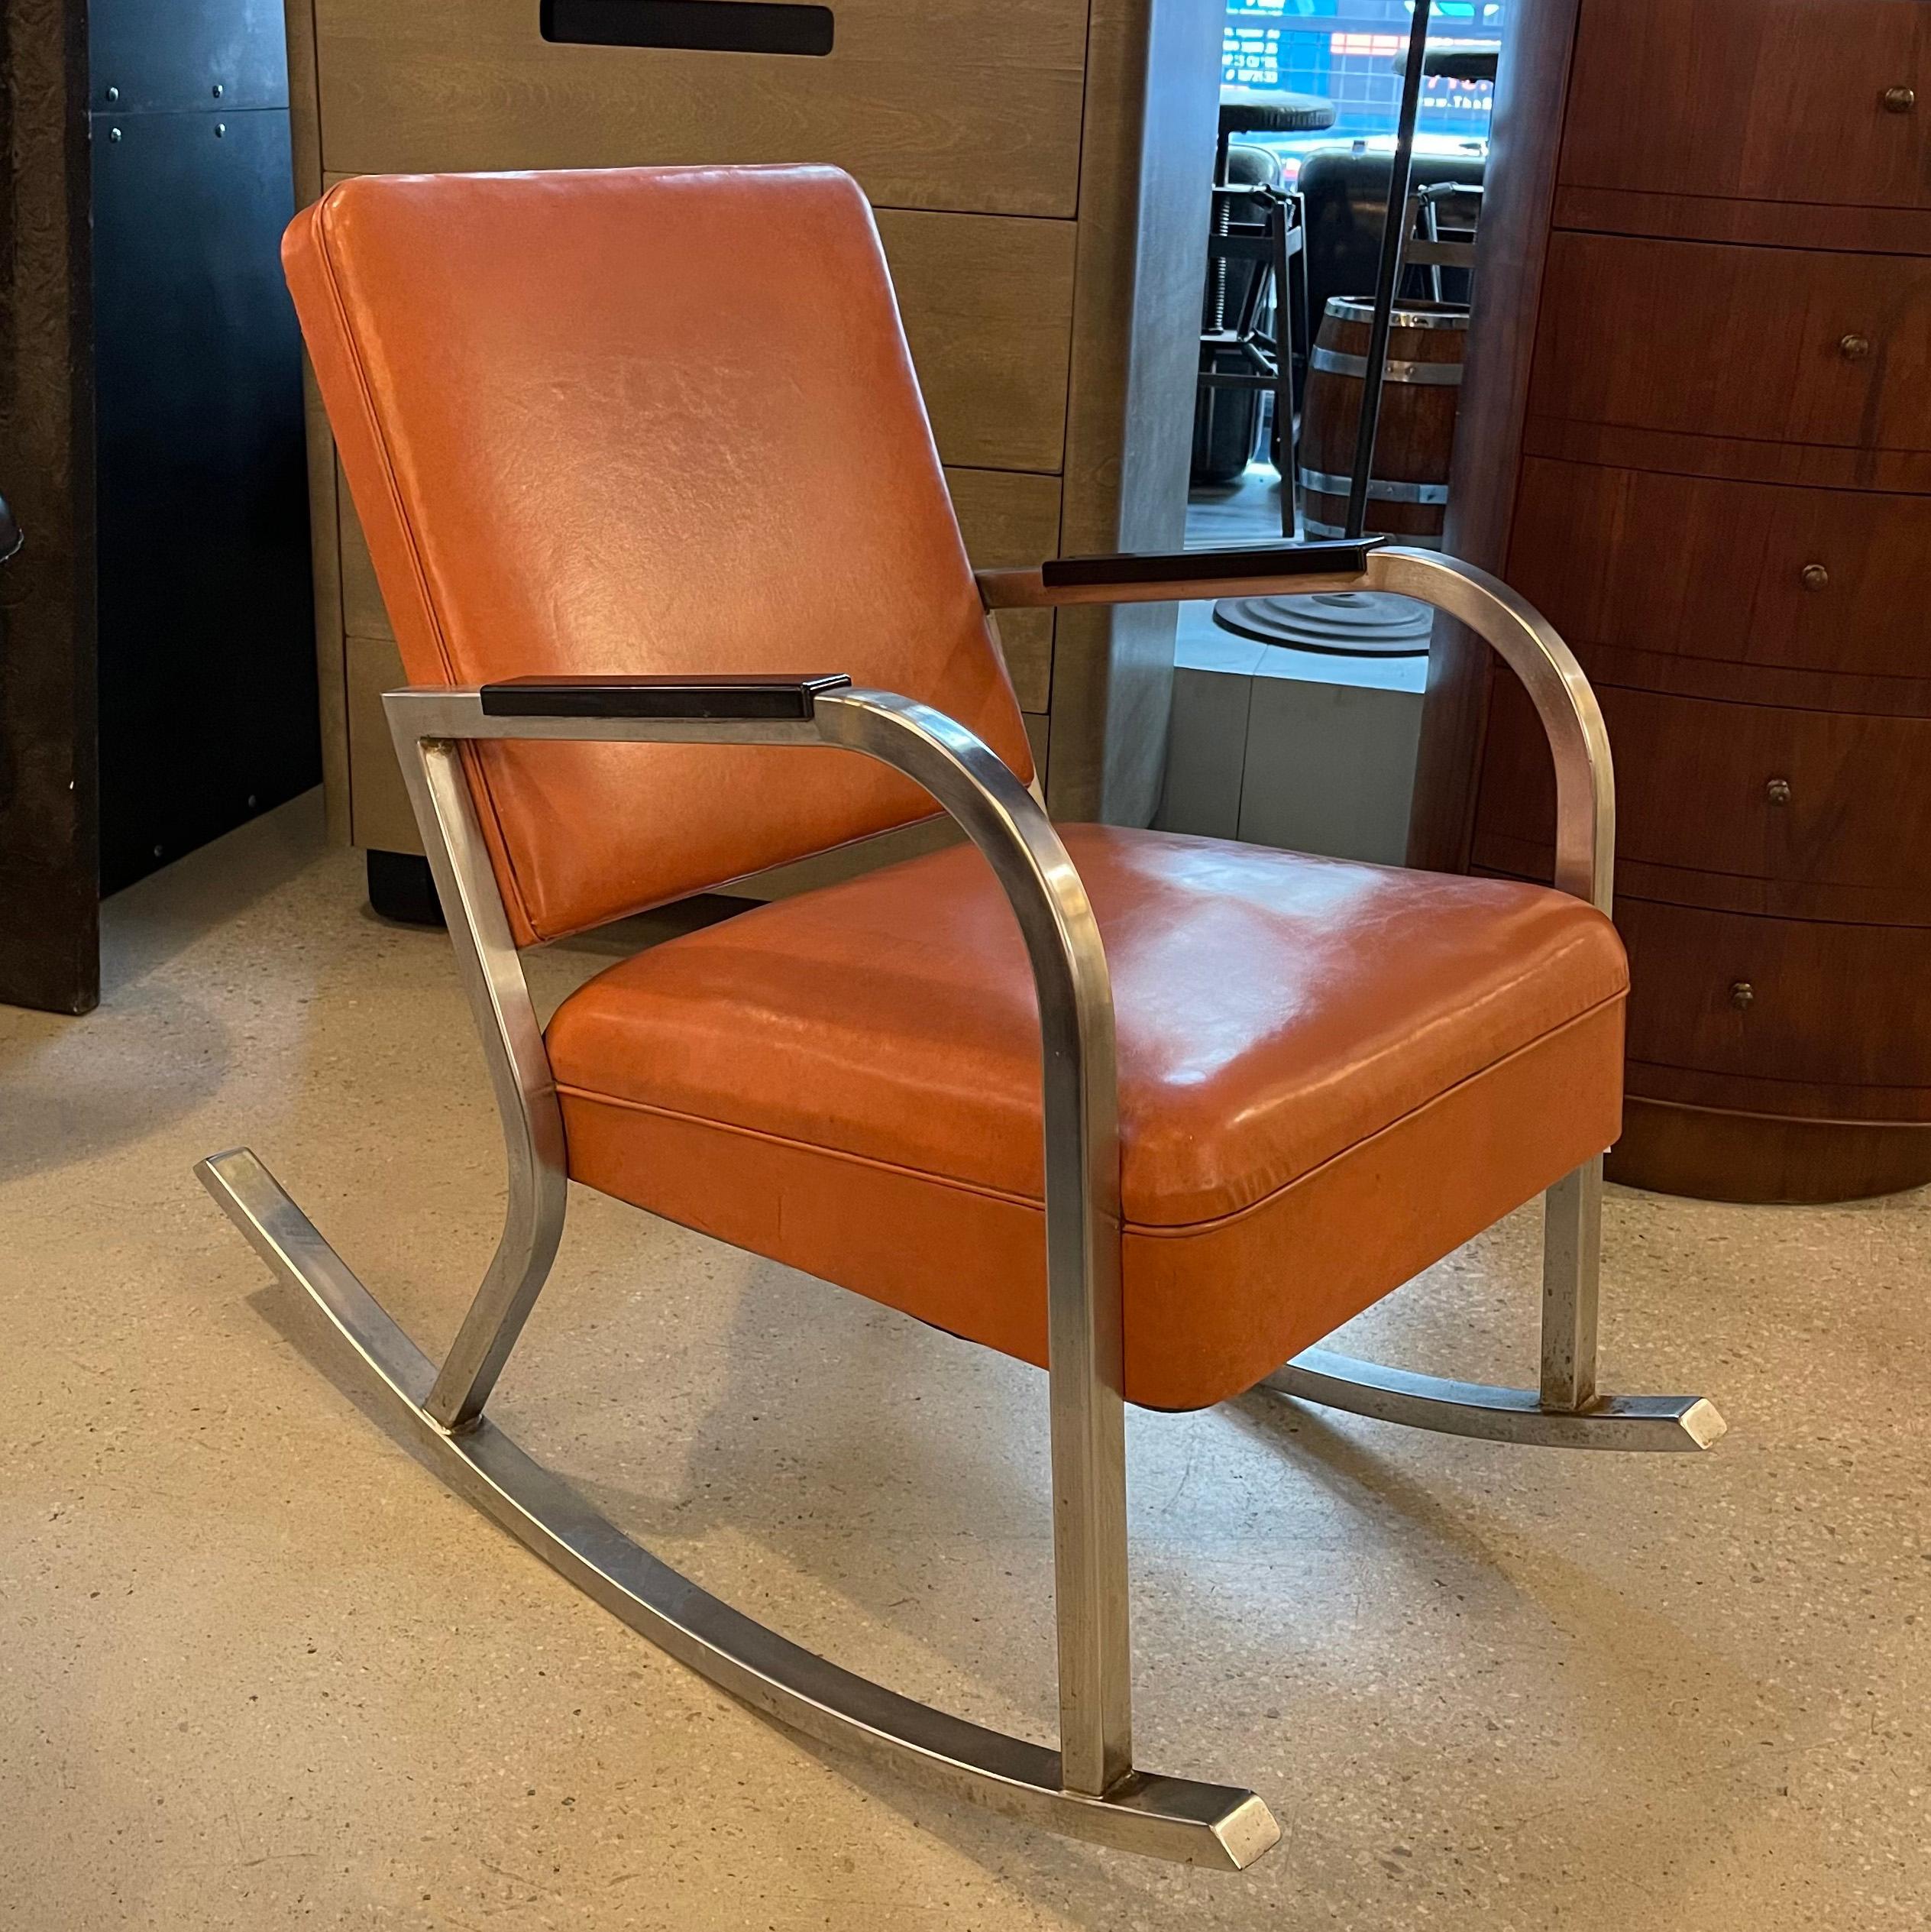 Art Deco, rocking chair by Gilbert Rohde features a chrome frame with Bakelite armrests with lether upholstered seat and back. Solid, stylish and comfortable.